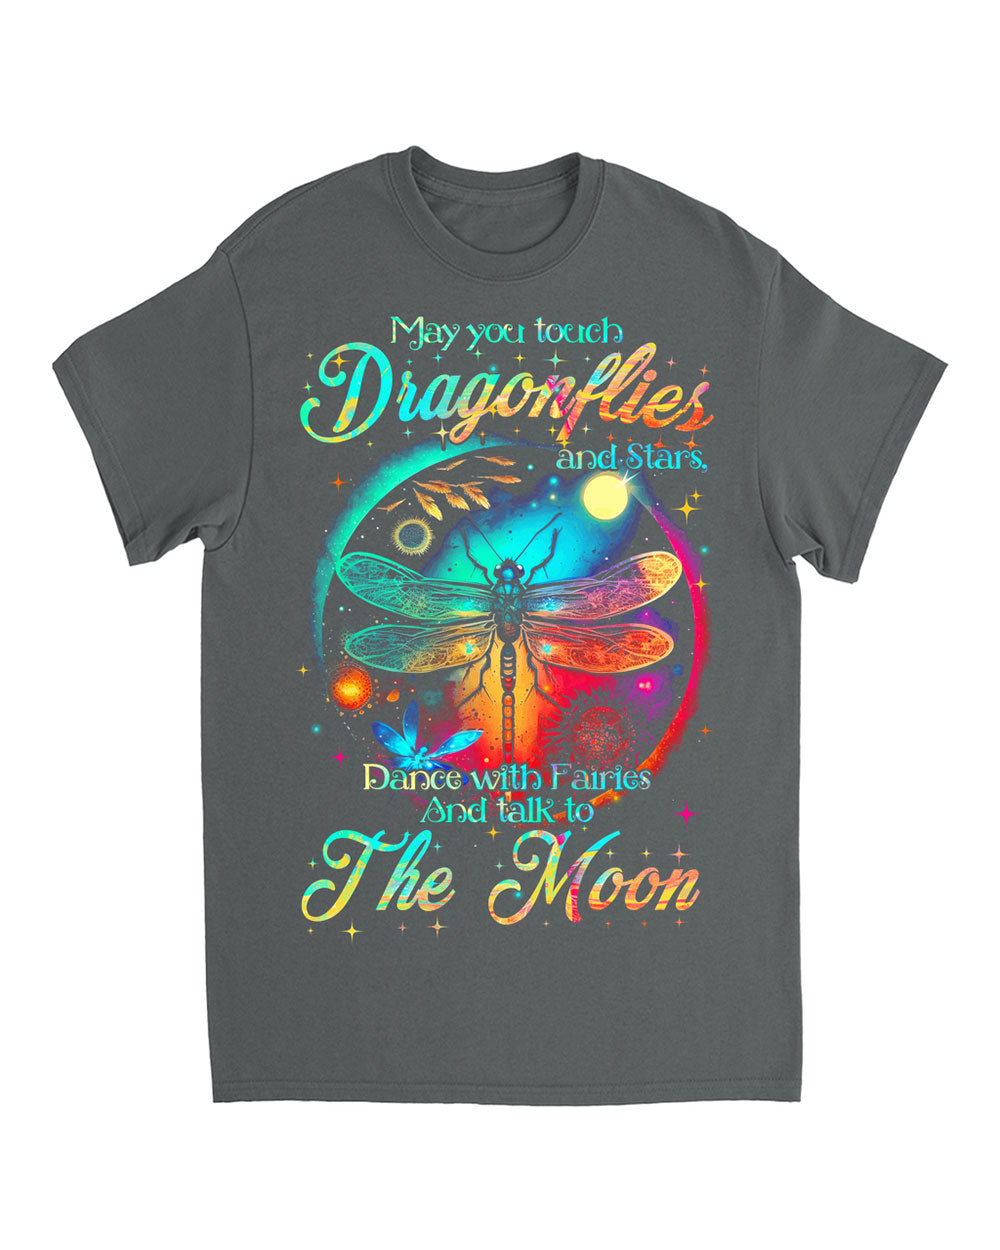 MAY YOU TOUCH DRAGONFLIES AND STARS COTTON SHIRT - TYTM0404232